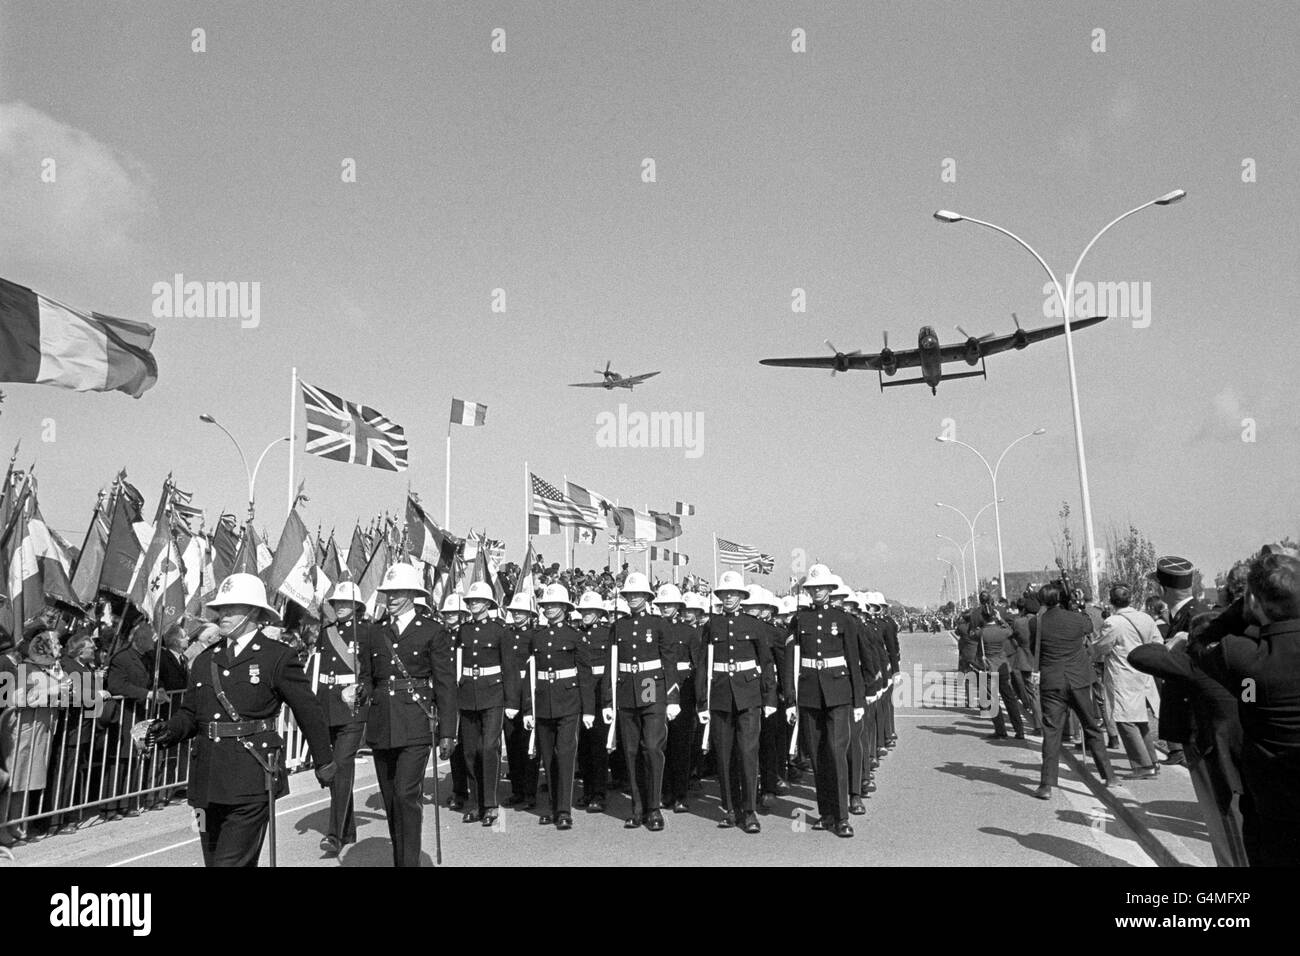 A Royal Air Force Spitfire fighter and Lancaster bomber fly over the 25th Anniversary ceremony of the Normandy Landings of World War Two in France. Here a parade of Royal Marines march past Stock Photo